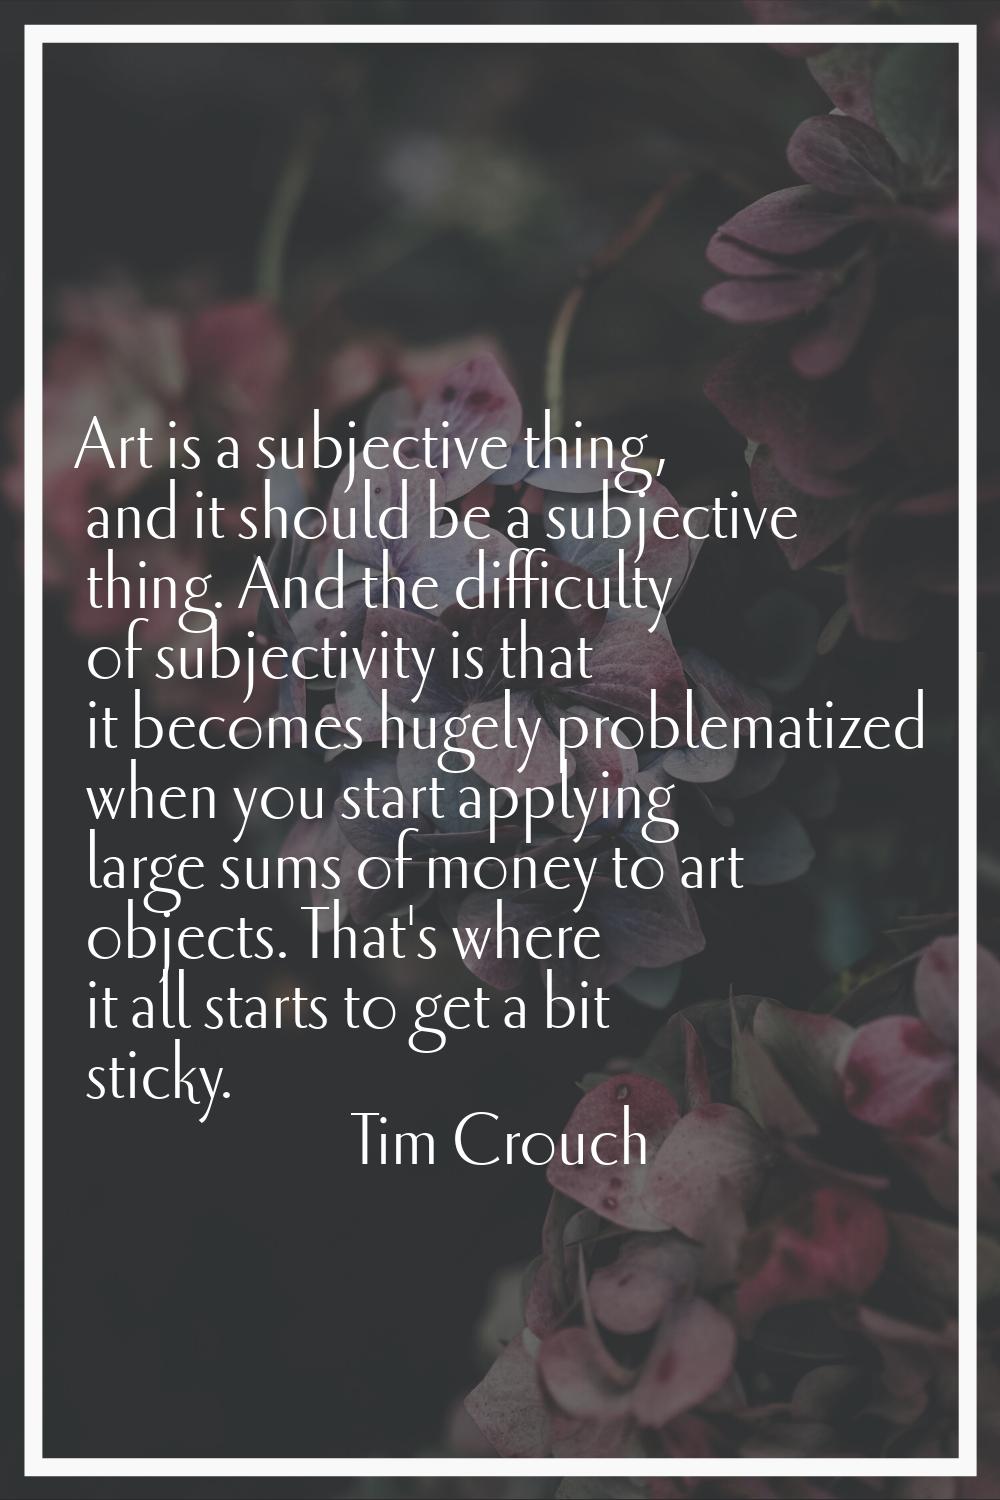 Art is a subjective thing, and it should be a subjective thing. And the difficulty of subjectivity 